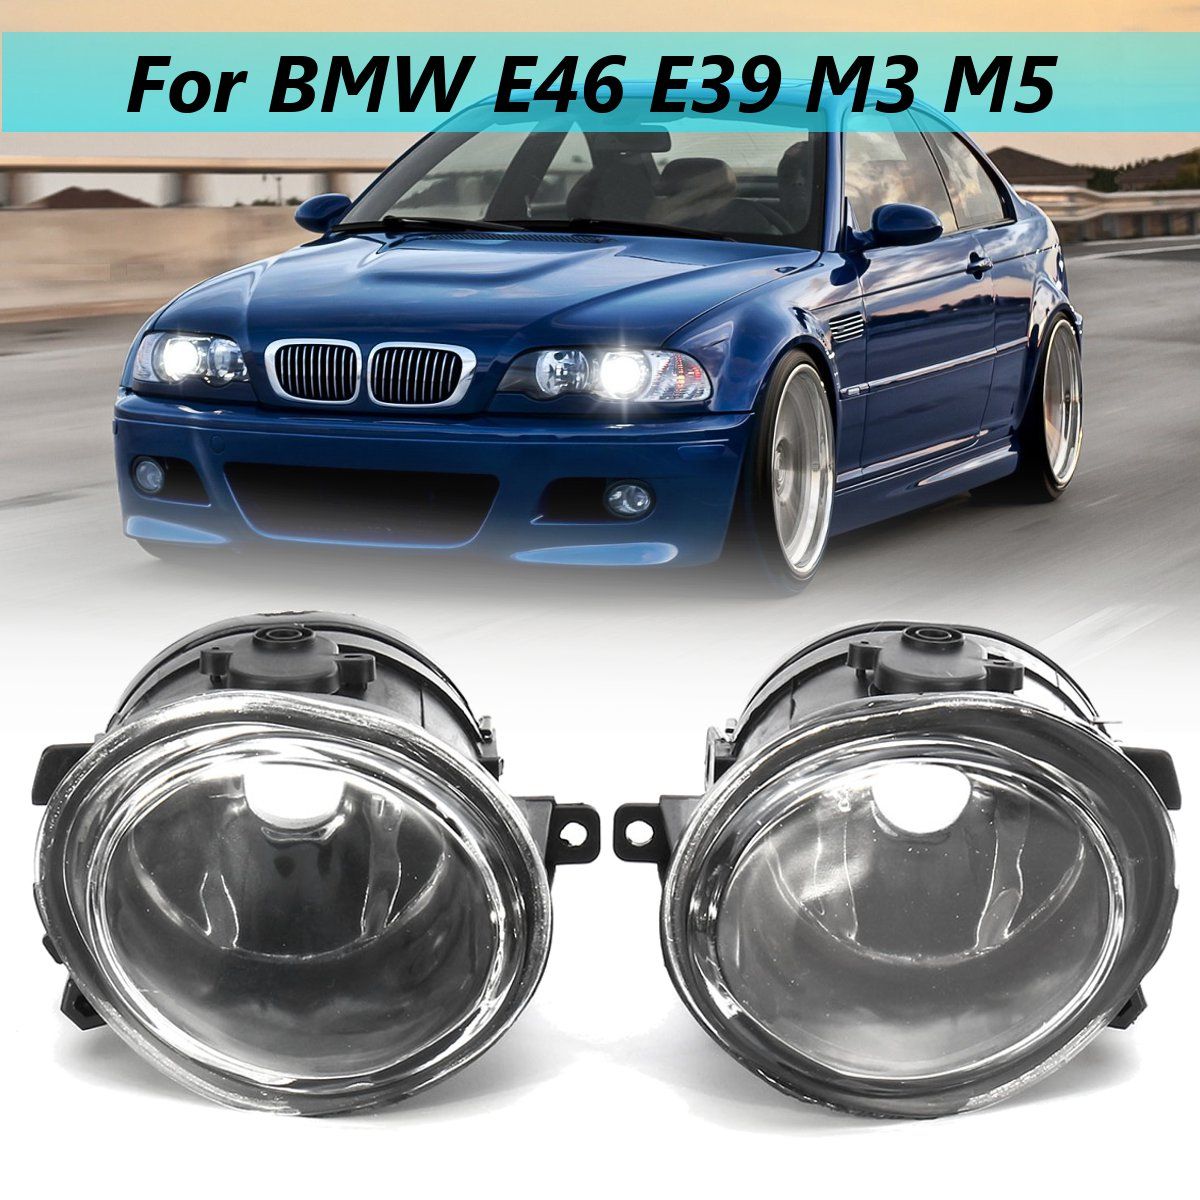 Car-Front-Fog-Lights-Shell-with-No-Bulb-Pair-For-BMW-3-Series-E46-5-Series-E39-M3-M5-1998-2004-1530914